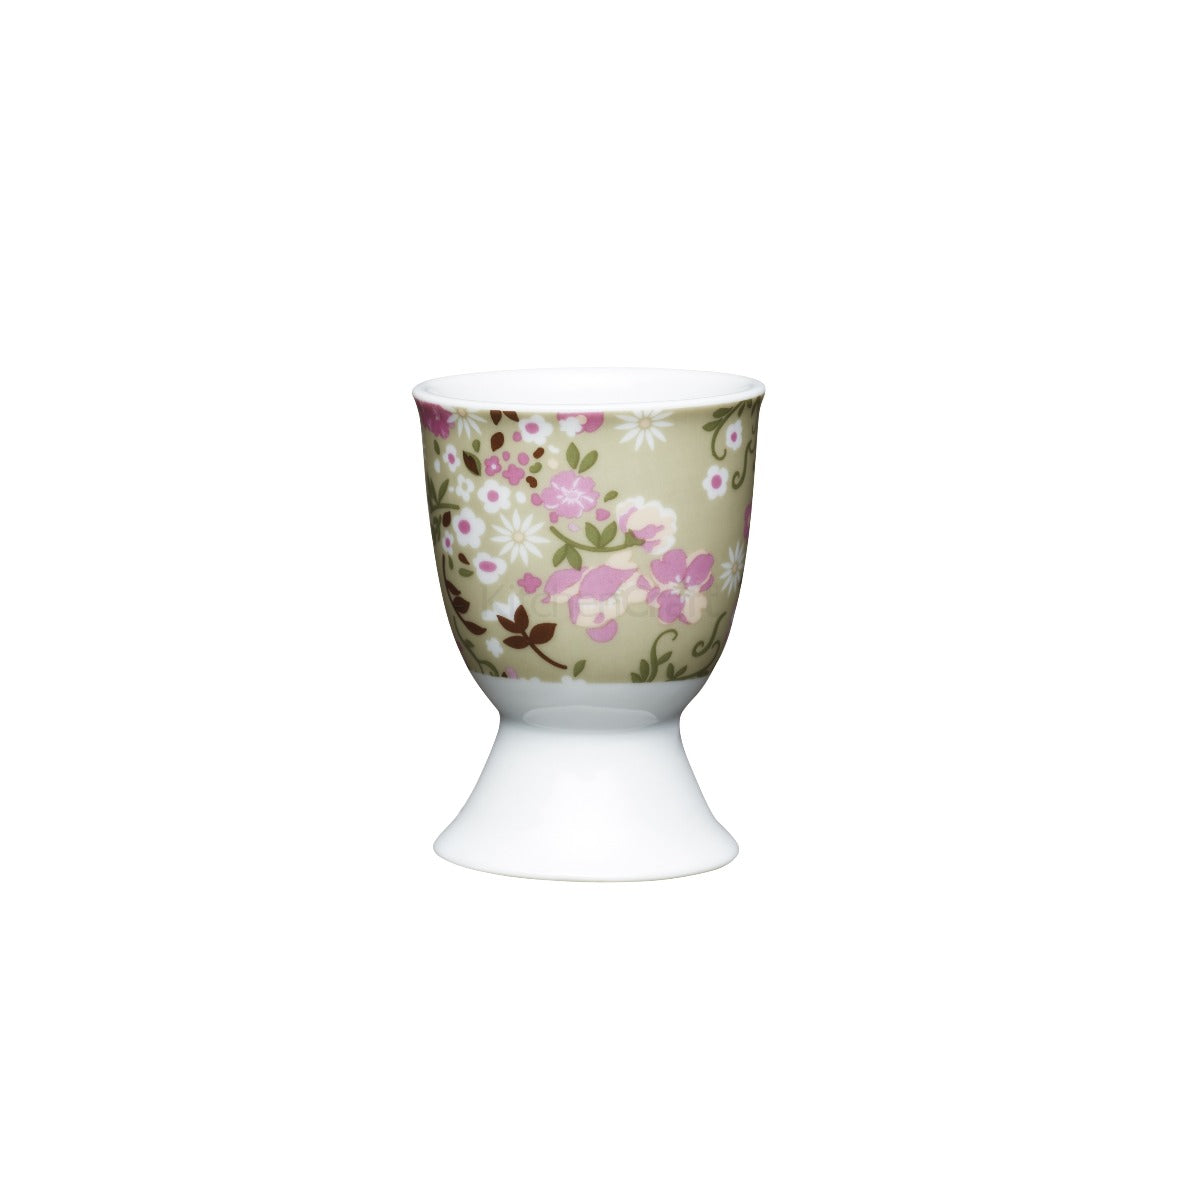 KitchenCraft Floral Meadow Porcelain Egg Cup